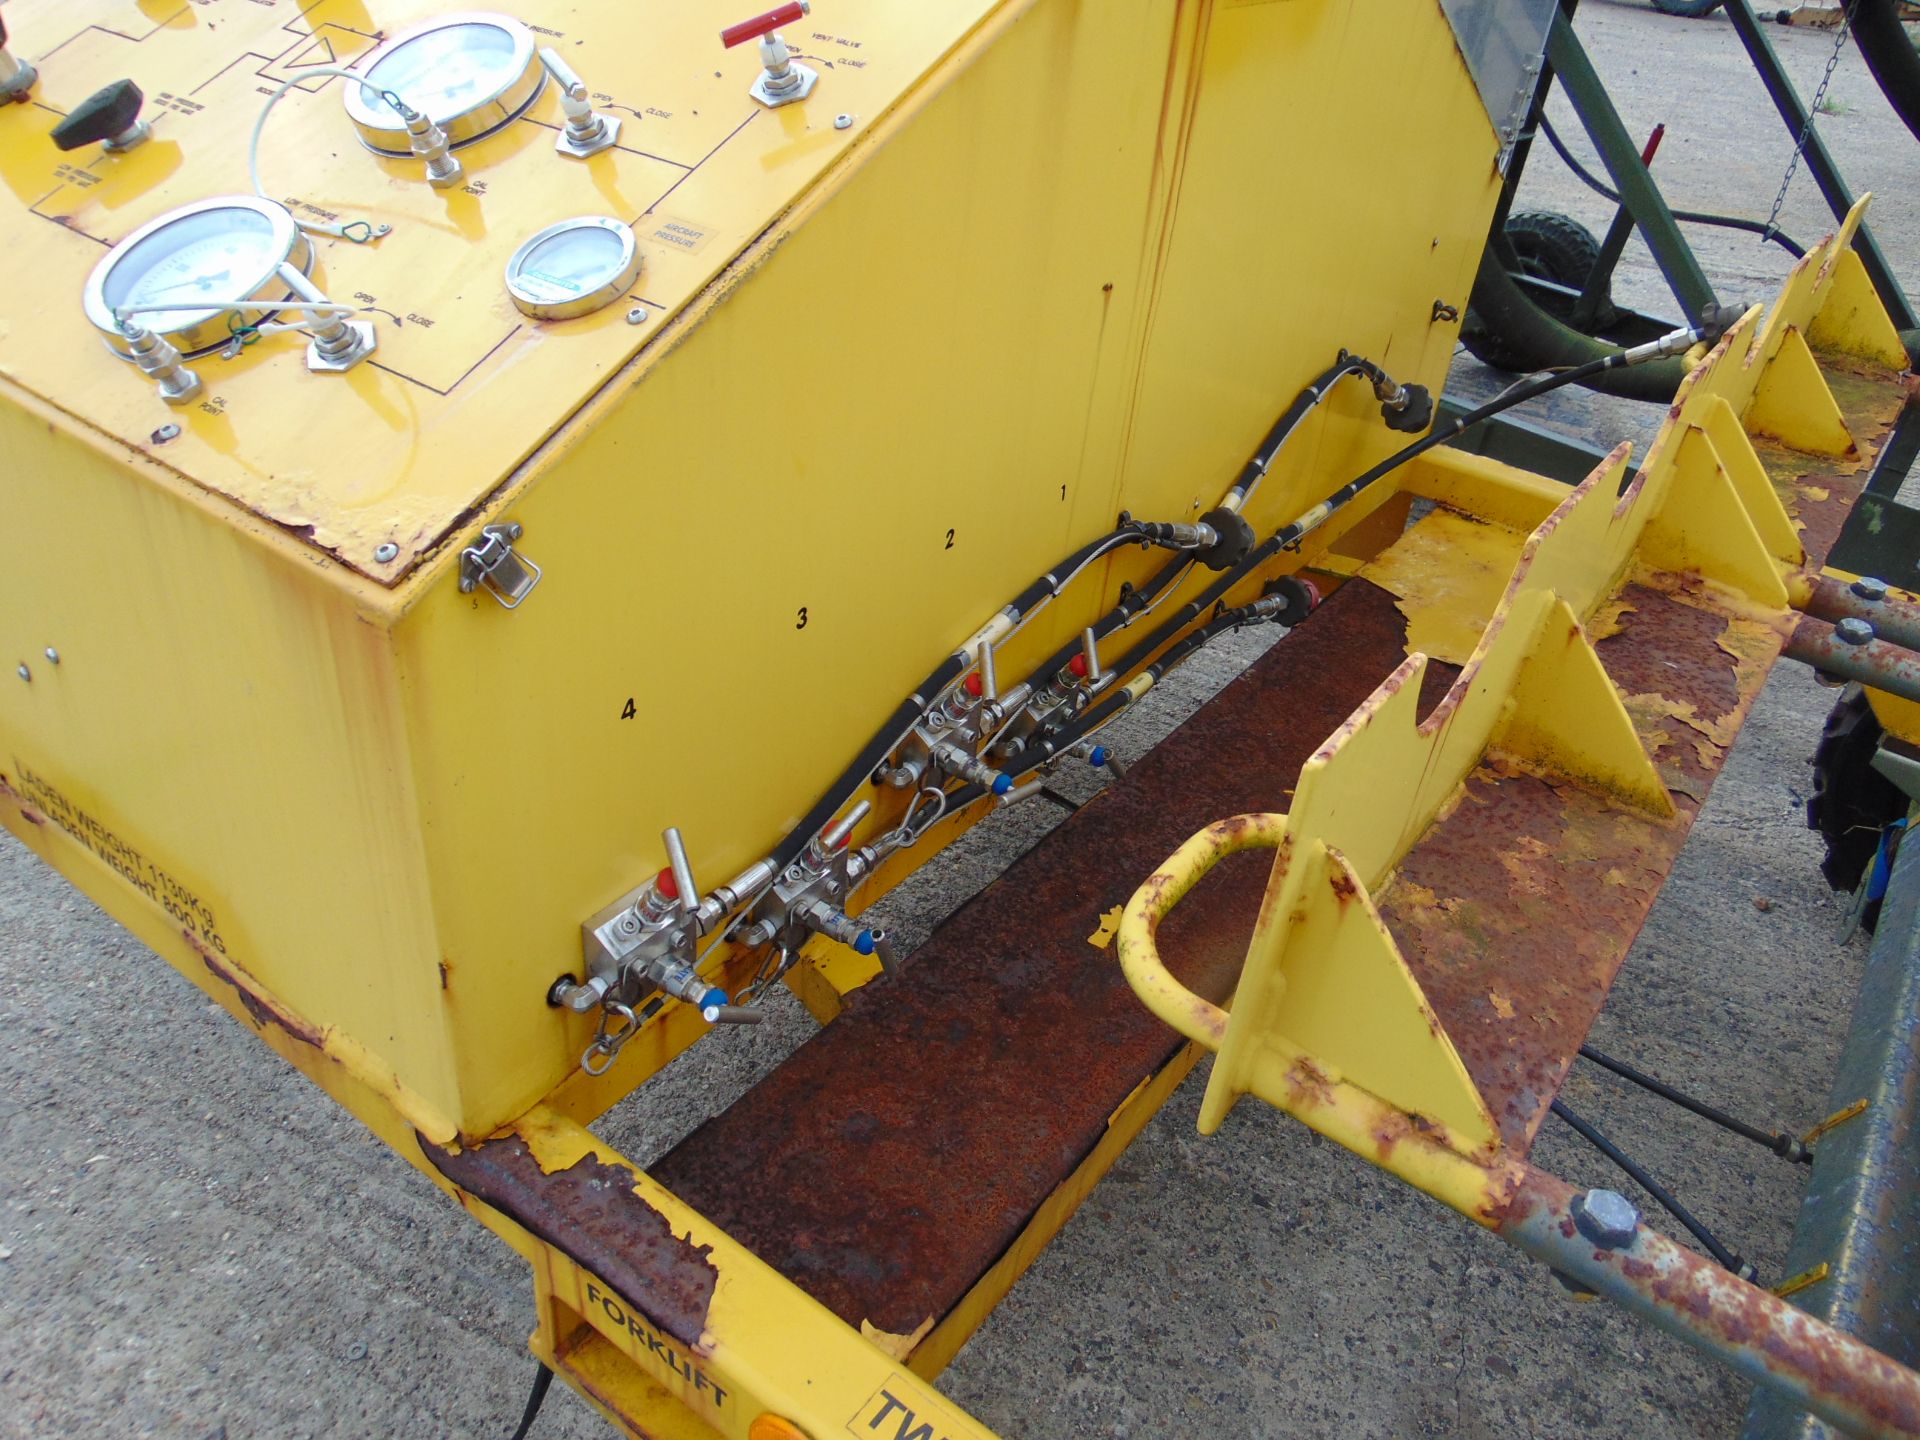 Nitrogen Single Axle Servicing Trolley with Brakes etc. from RAF - Image 3 of 4